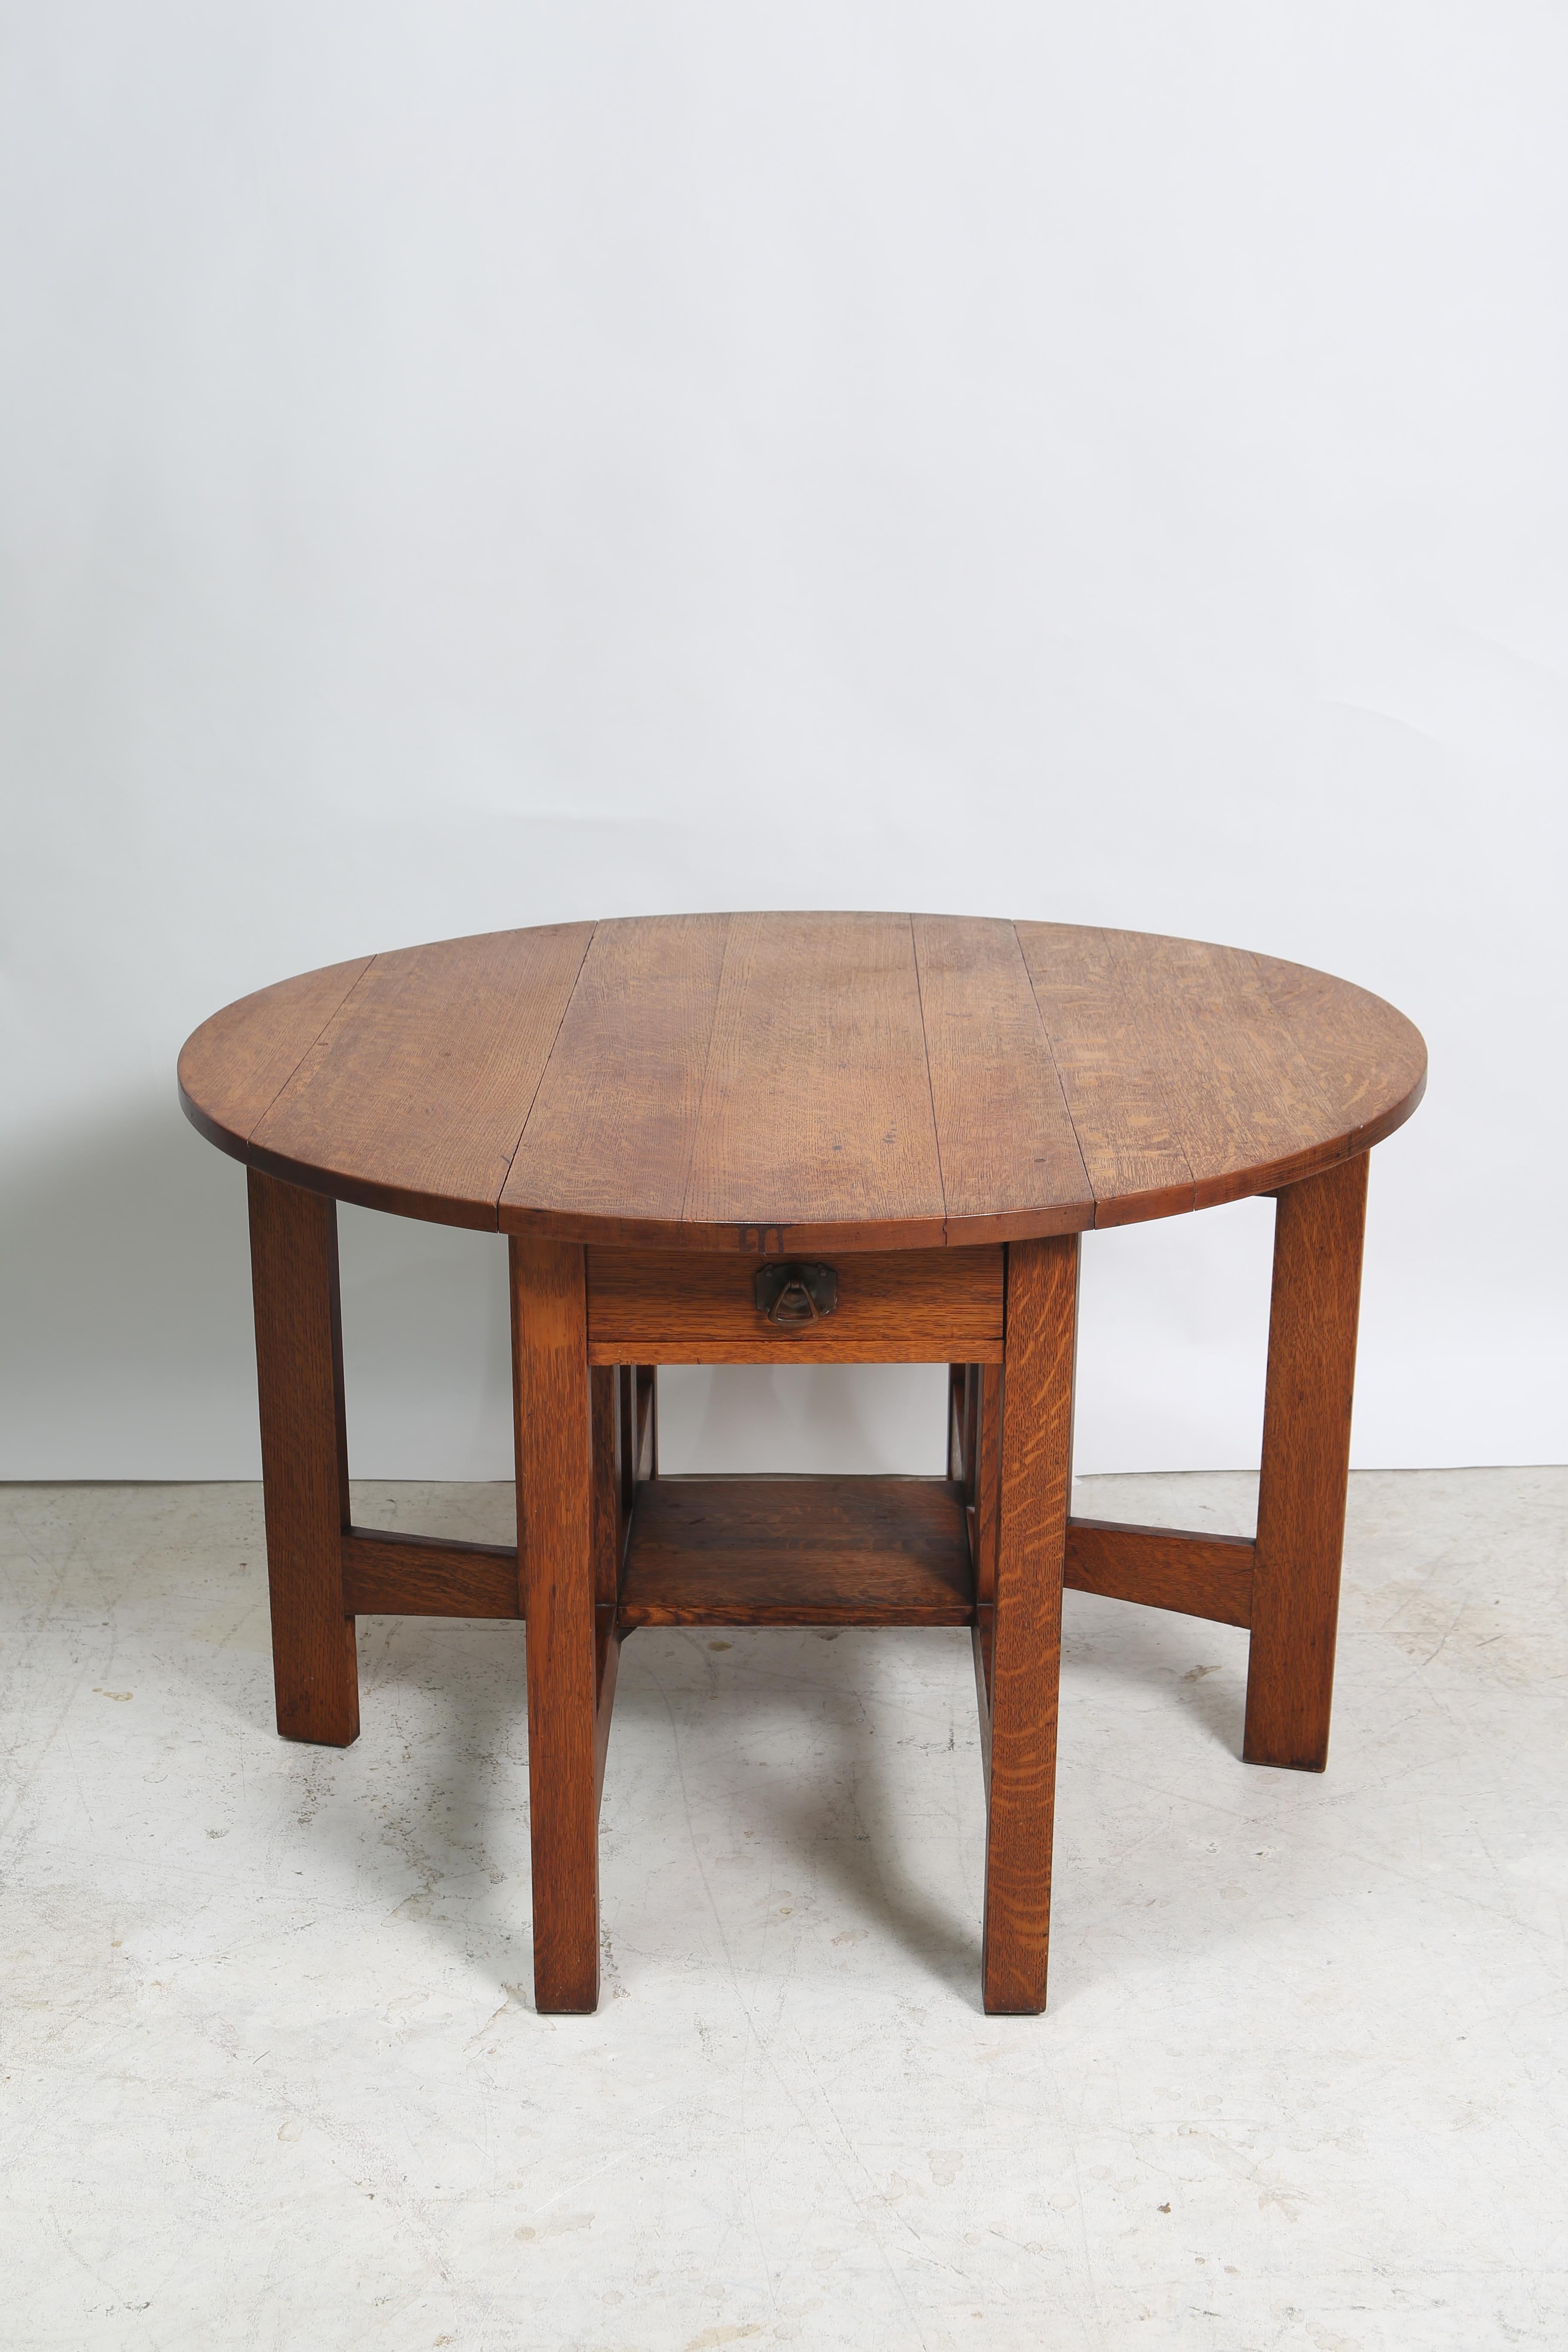 20th Century Arts and Crafts Oak Centre table by Charles Limbert